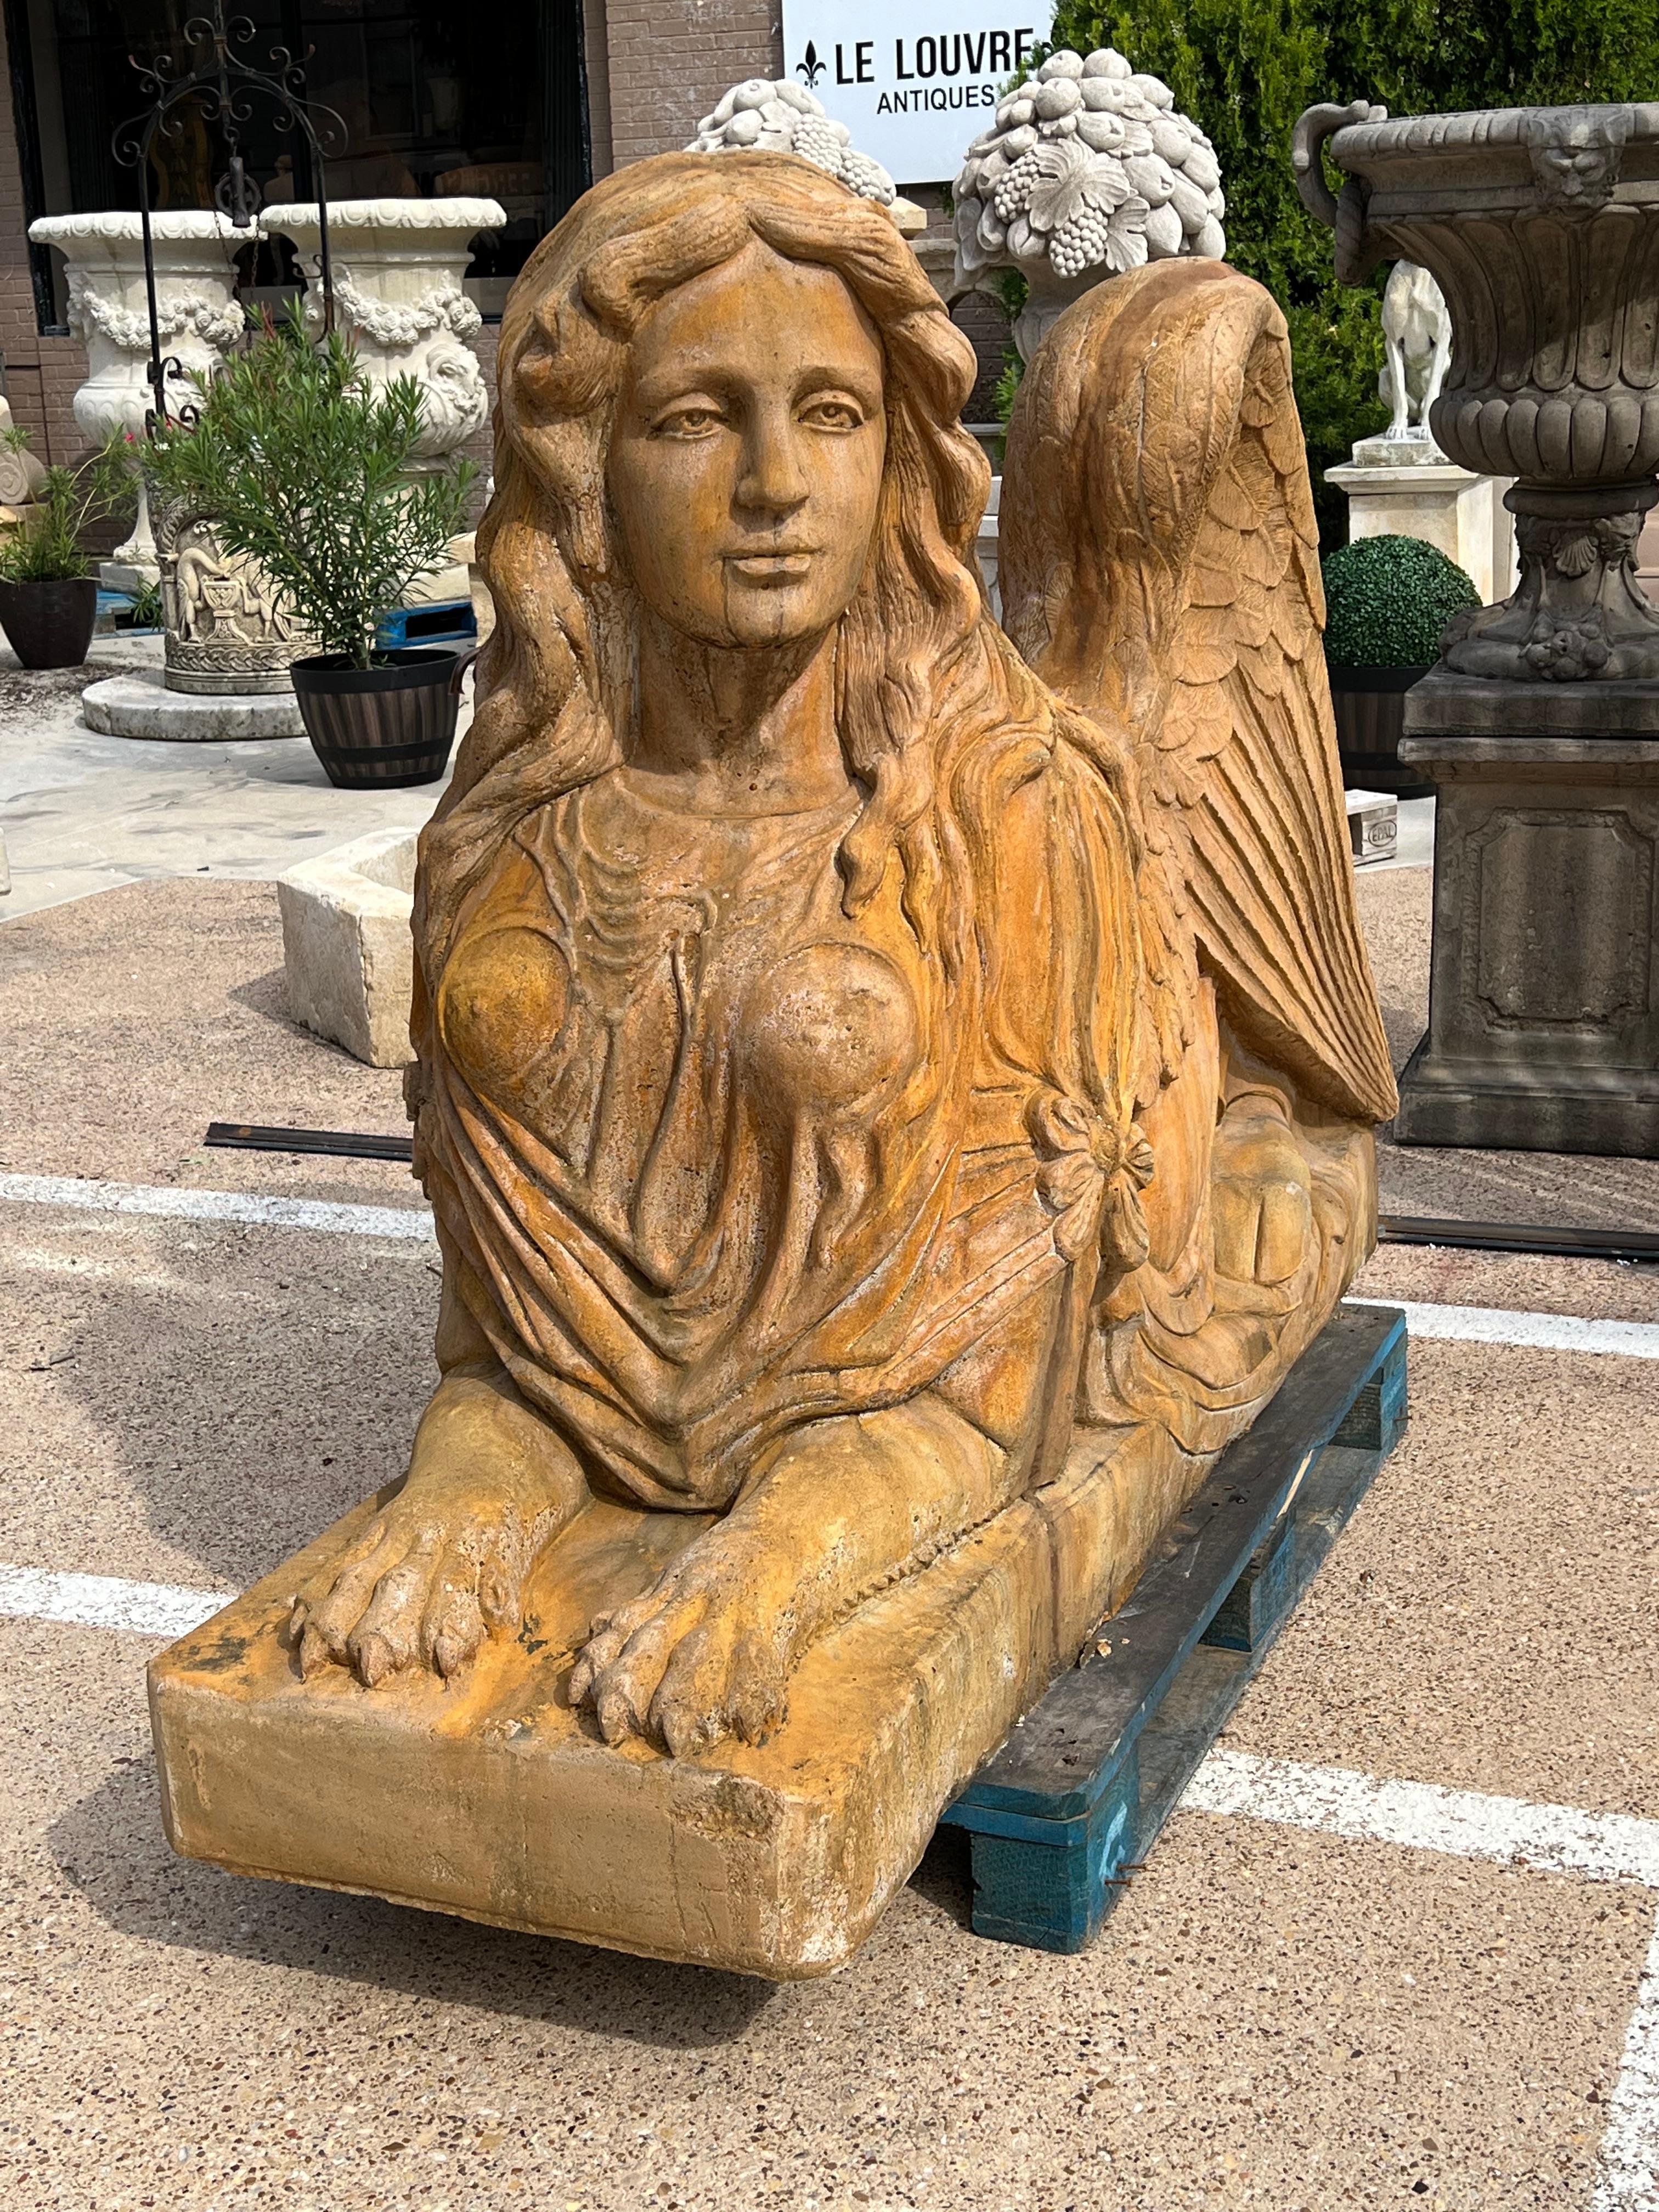 Based on ancient Greek mythology of a hybrid creature with the head of a human, the body of a lion, and the wings of an eagle, this pair of monumental sphinx statues were cast in France. The origin of the sphinx can be traced back to the Dynasty IV